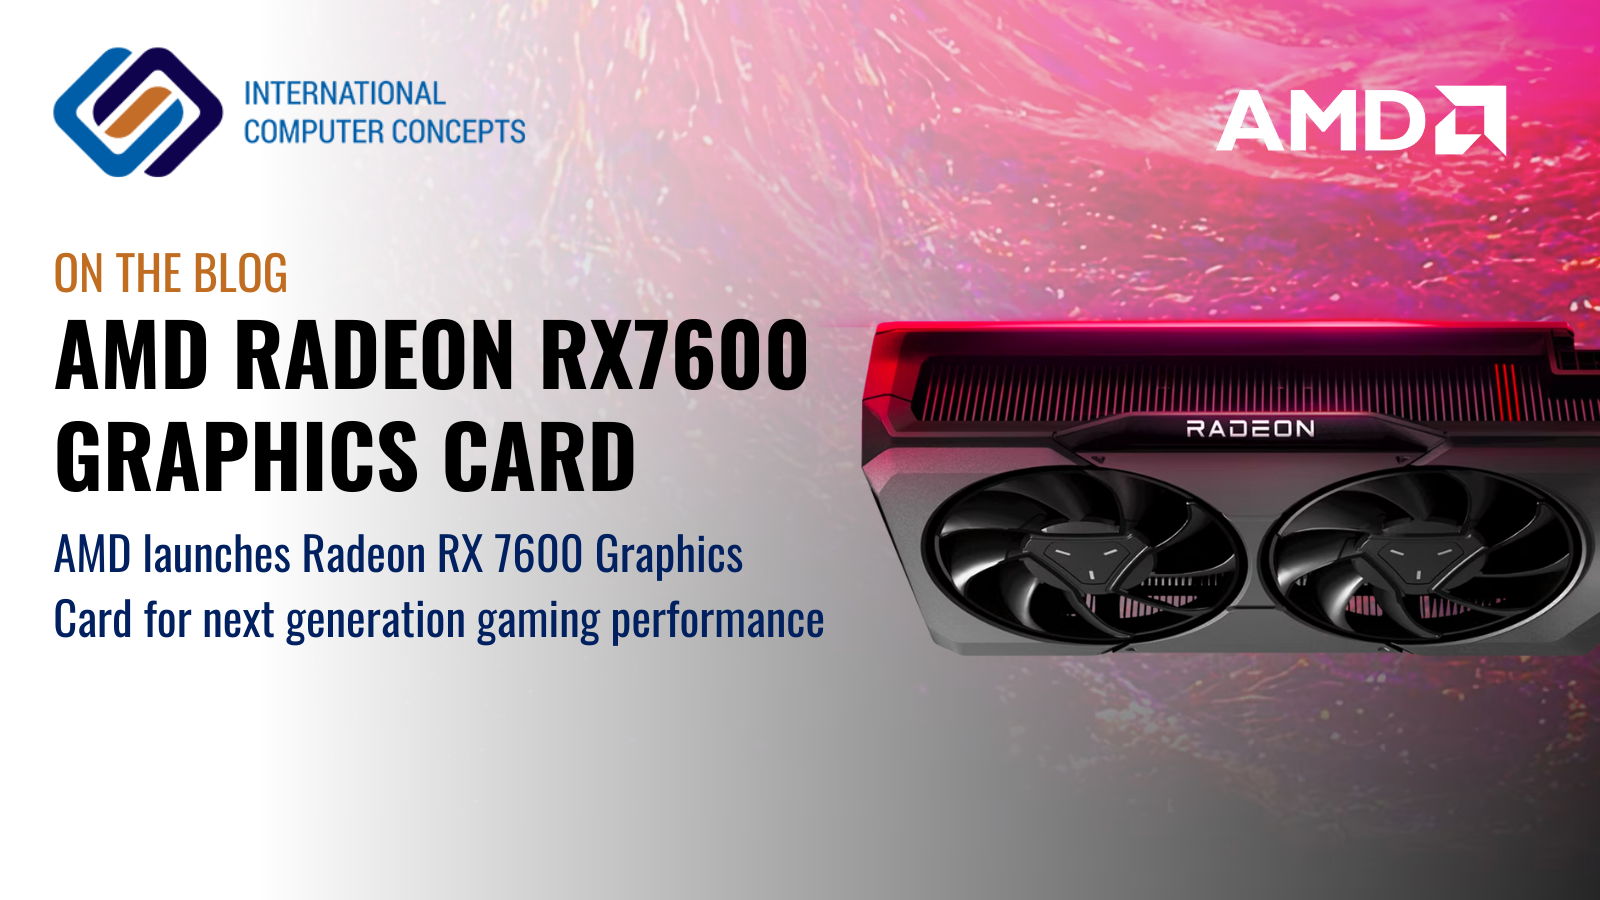 AMD launches Radeon RX 7600 Graphics Card for next generation gaming performance